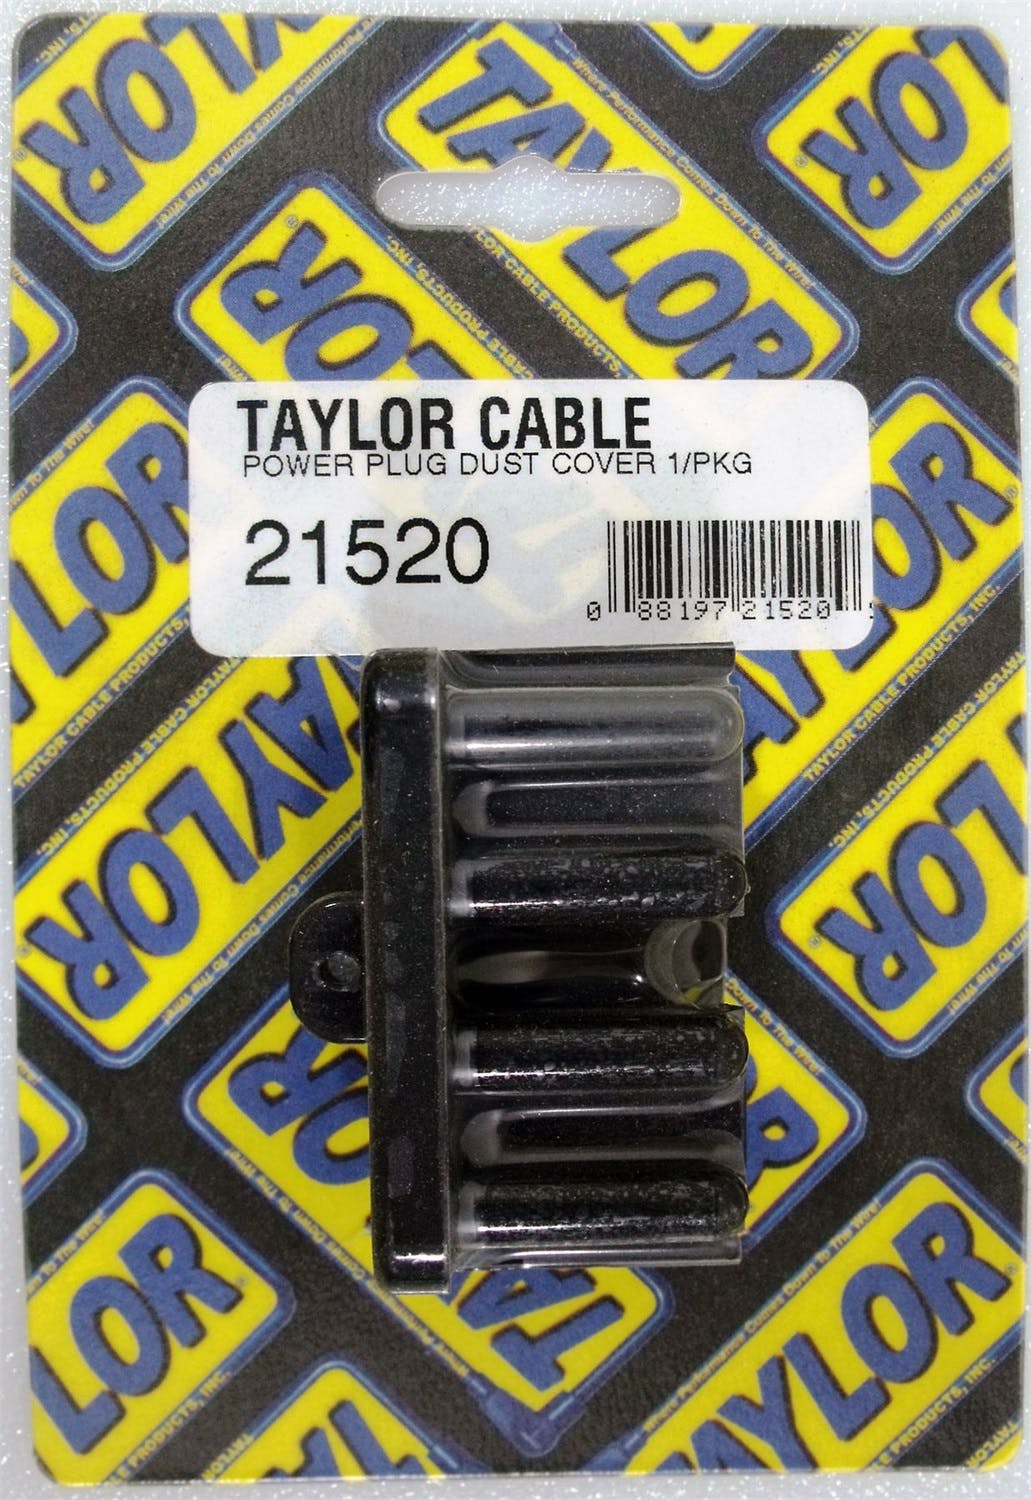 Taylor Cable Products 21520 Power Plug Dust Cover 1/Pkg